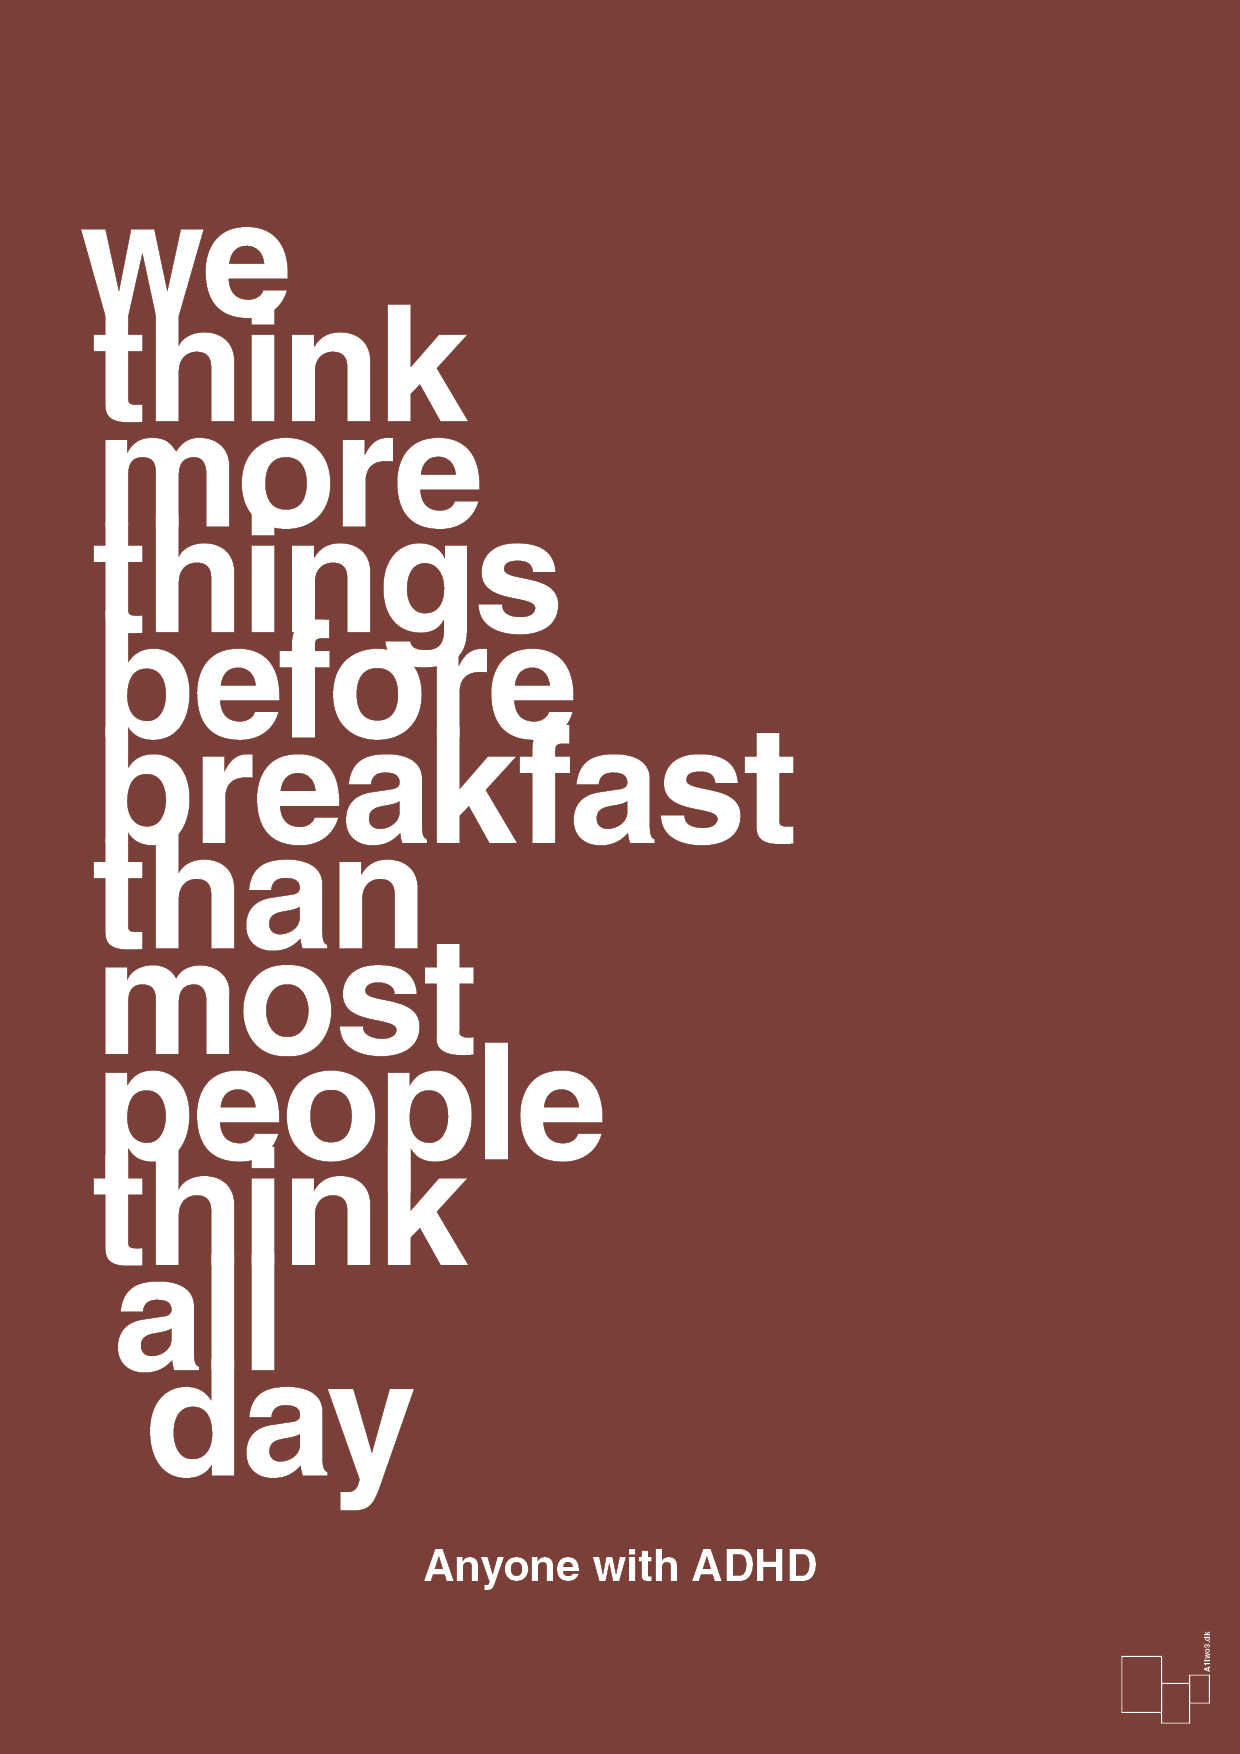 we think more things before breakfast than most people think all day - Plakat med Samfund i Red Pepper